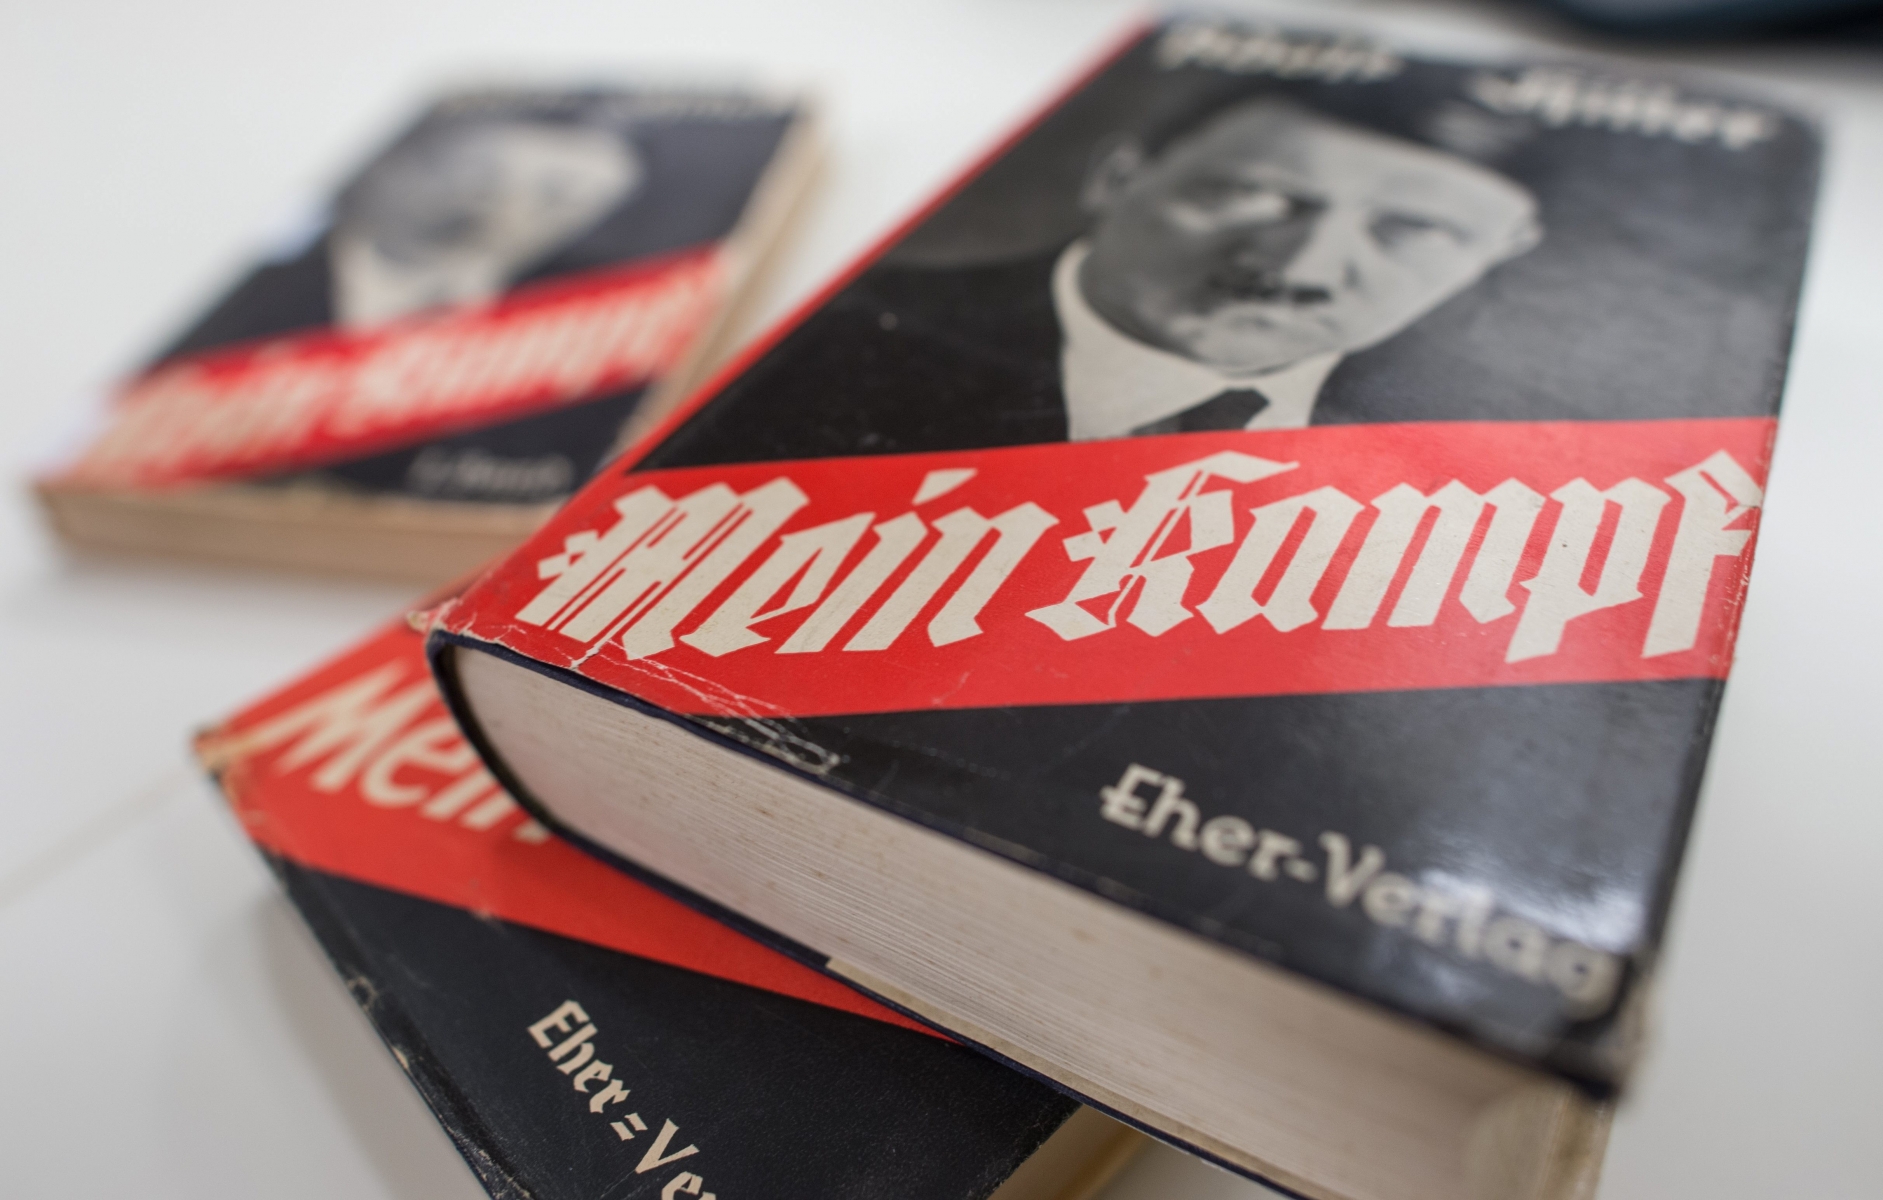 FILE - In this  Dec. 11, 2015, file photo, different editions of Adolf Hitler's "Mein Kampf" are on display at the Institute for Contemporary History in Munich. For 70 years since the Nazi defeat in World War II, copyright law has been used to prohibit the publication of Mein Kampf, the notorious anti-Semitic tome in which Hitler set out his ideology, in Germany. That will change in January 2016, when a new edition with critical commentary, the product of several years' work by a publicly funded institute, hits the shelves. While historians say it could help fill a gap in Germans' knowledge of the era, Jewish groups are wary. (Matthias Balk/dpa via AP) Germany Mein Kampf